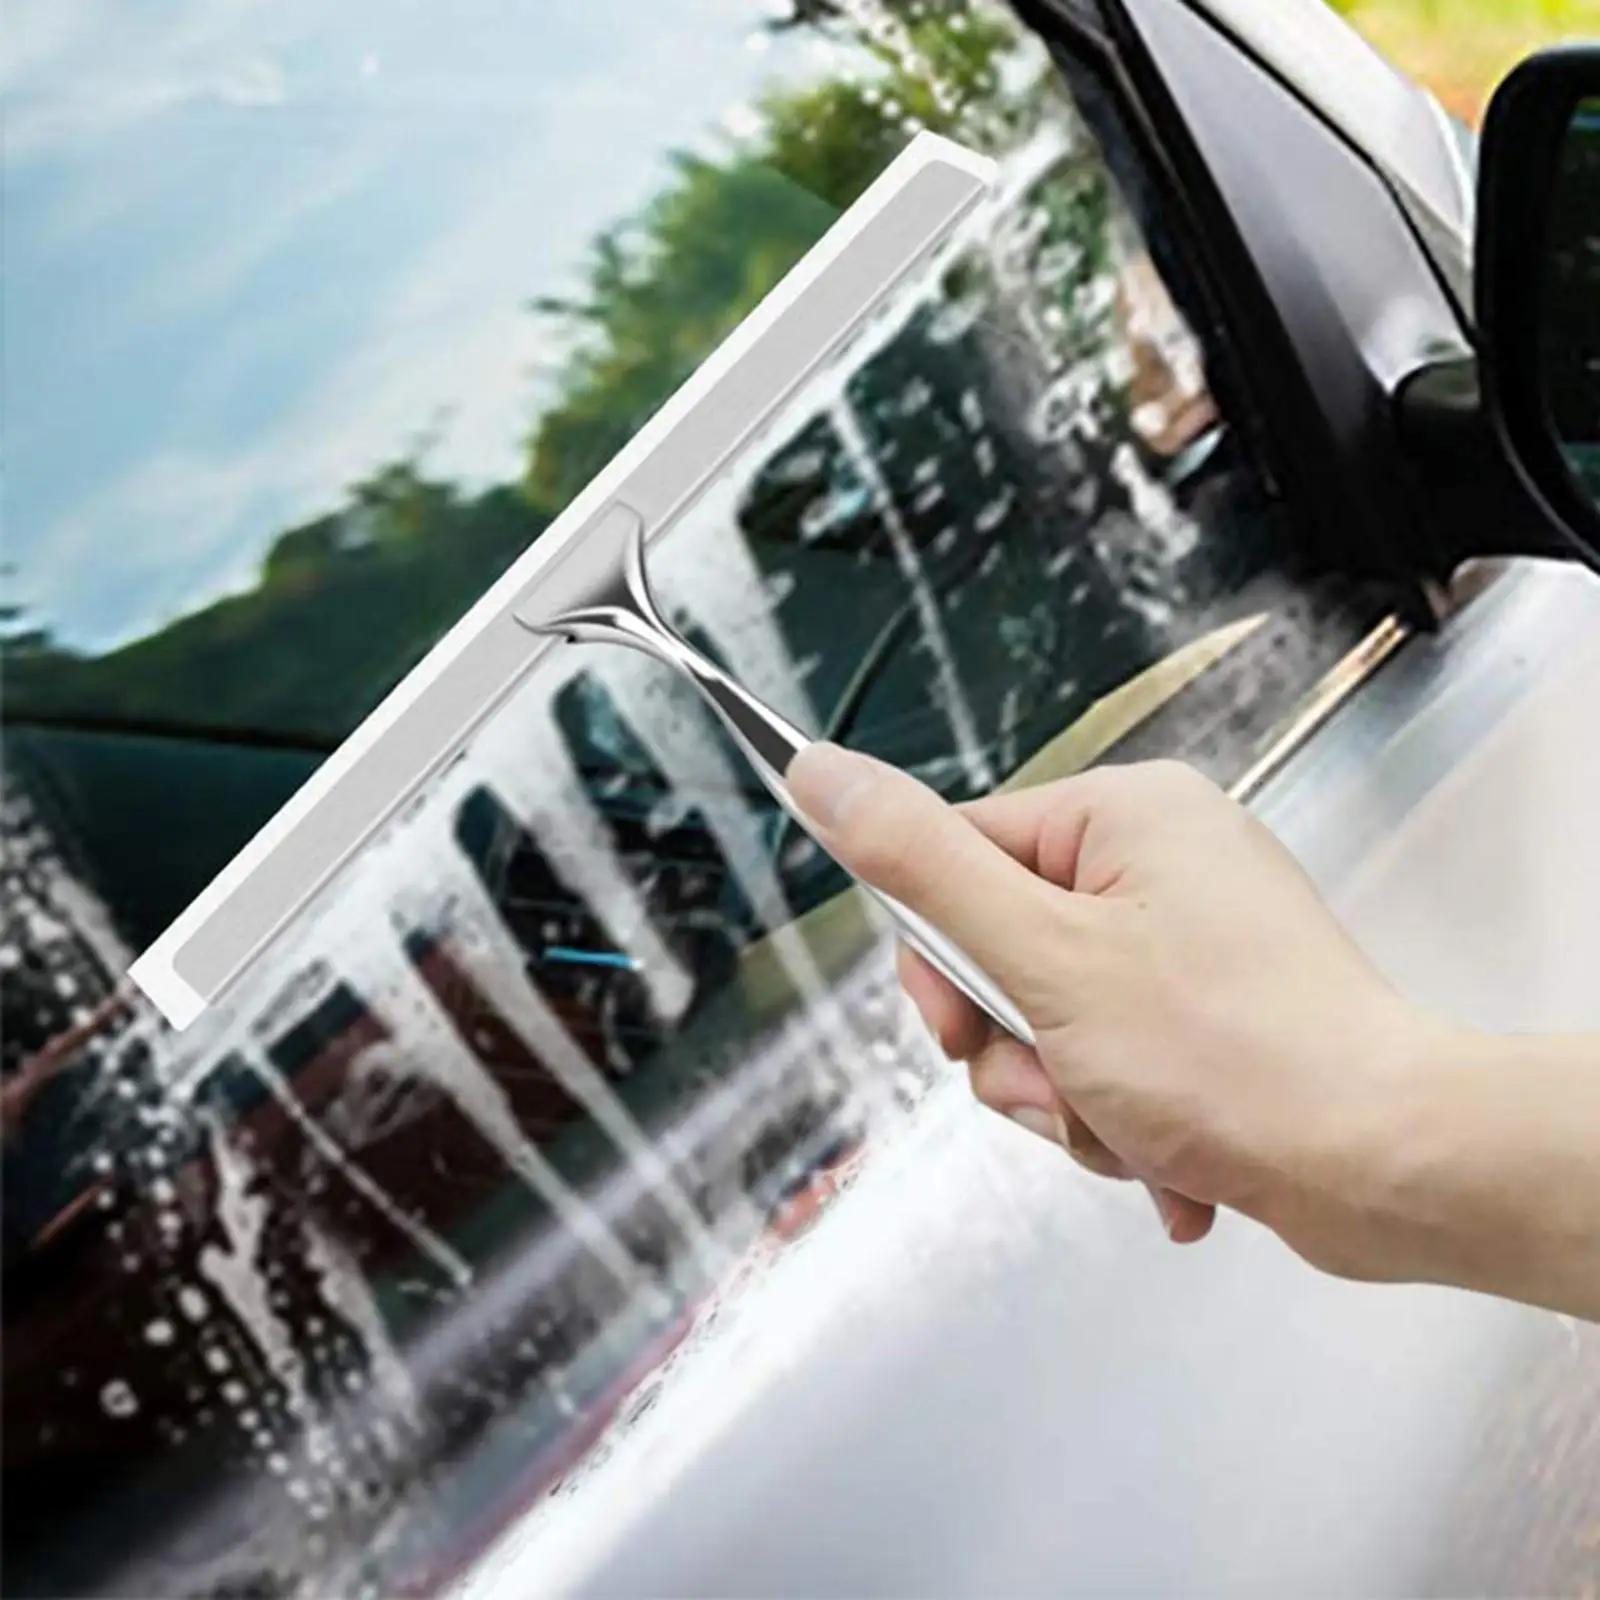 Multipurpose Shower Squeegee Soap Foam Cleaner with Suction Hook Car Windshield for Tiled Surfaces Home Bathroom Shower Doors